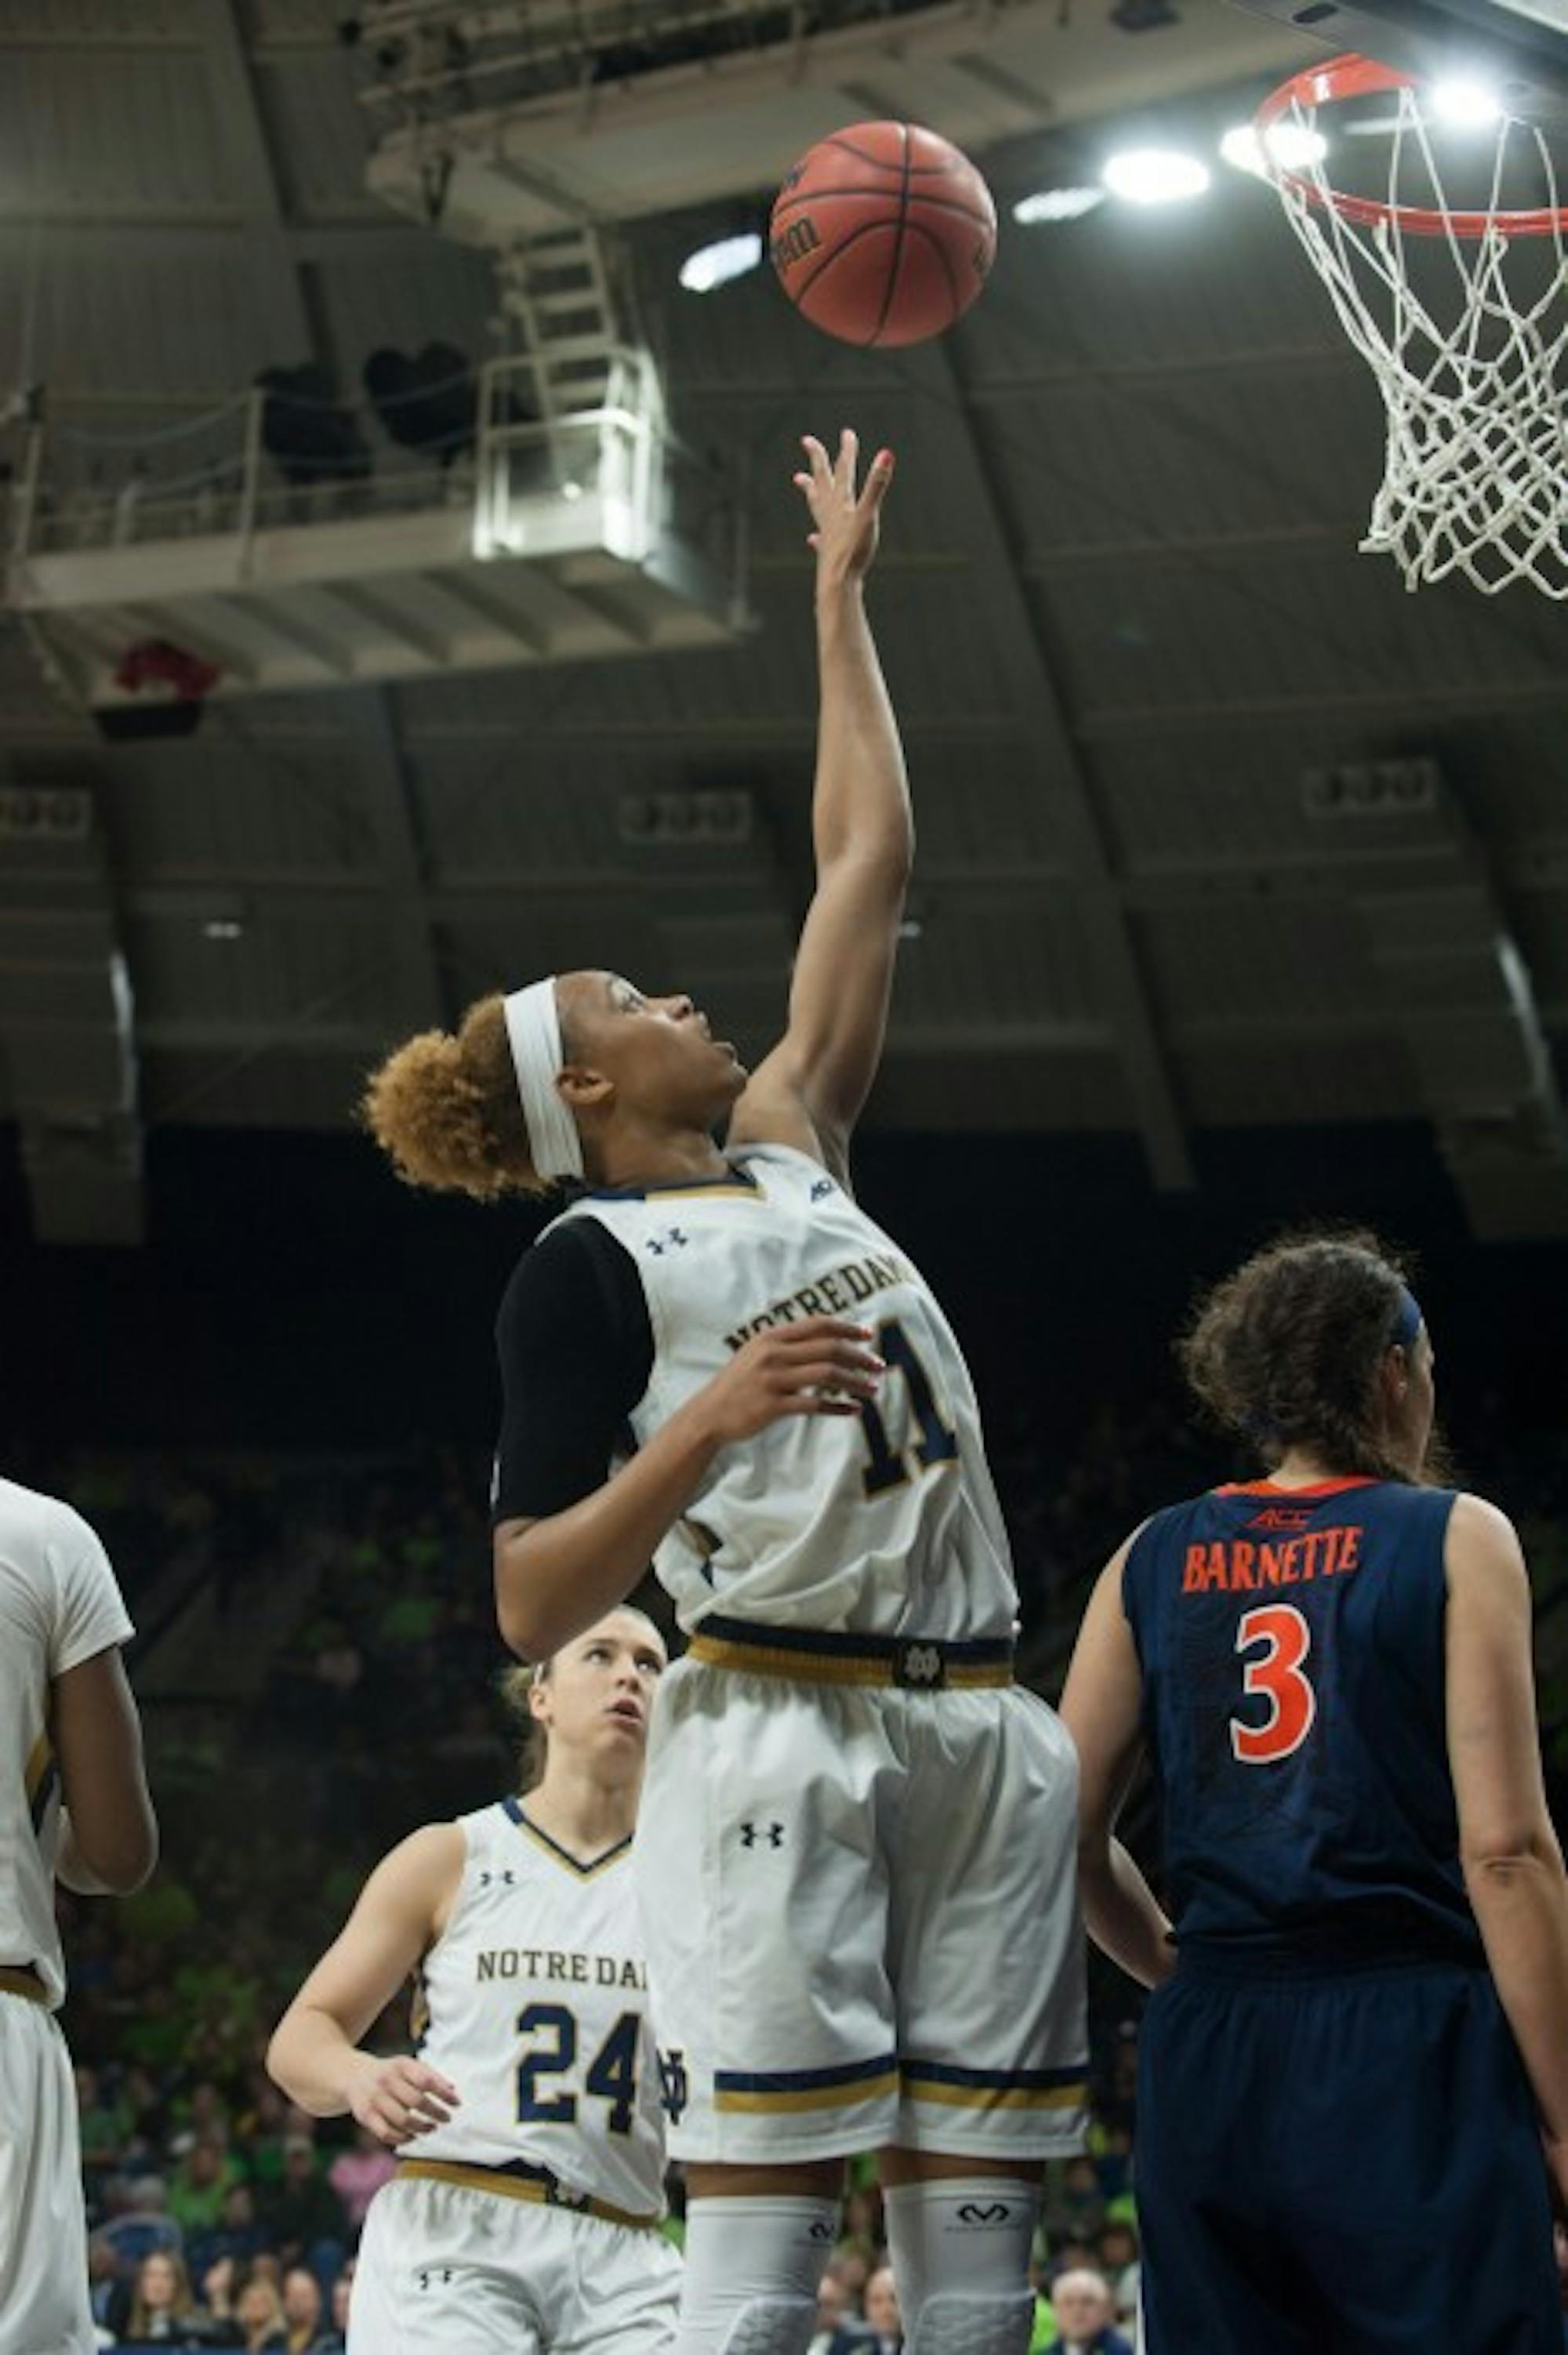 Irish freshman forward Brianna Turner skies for a loose ball after a foul during Notre Dame’s 75-54 win over Virginia on Thursday.